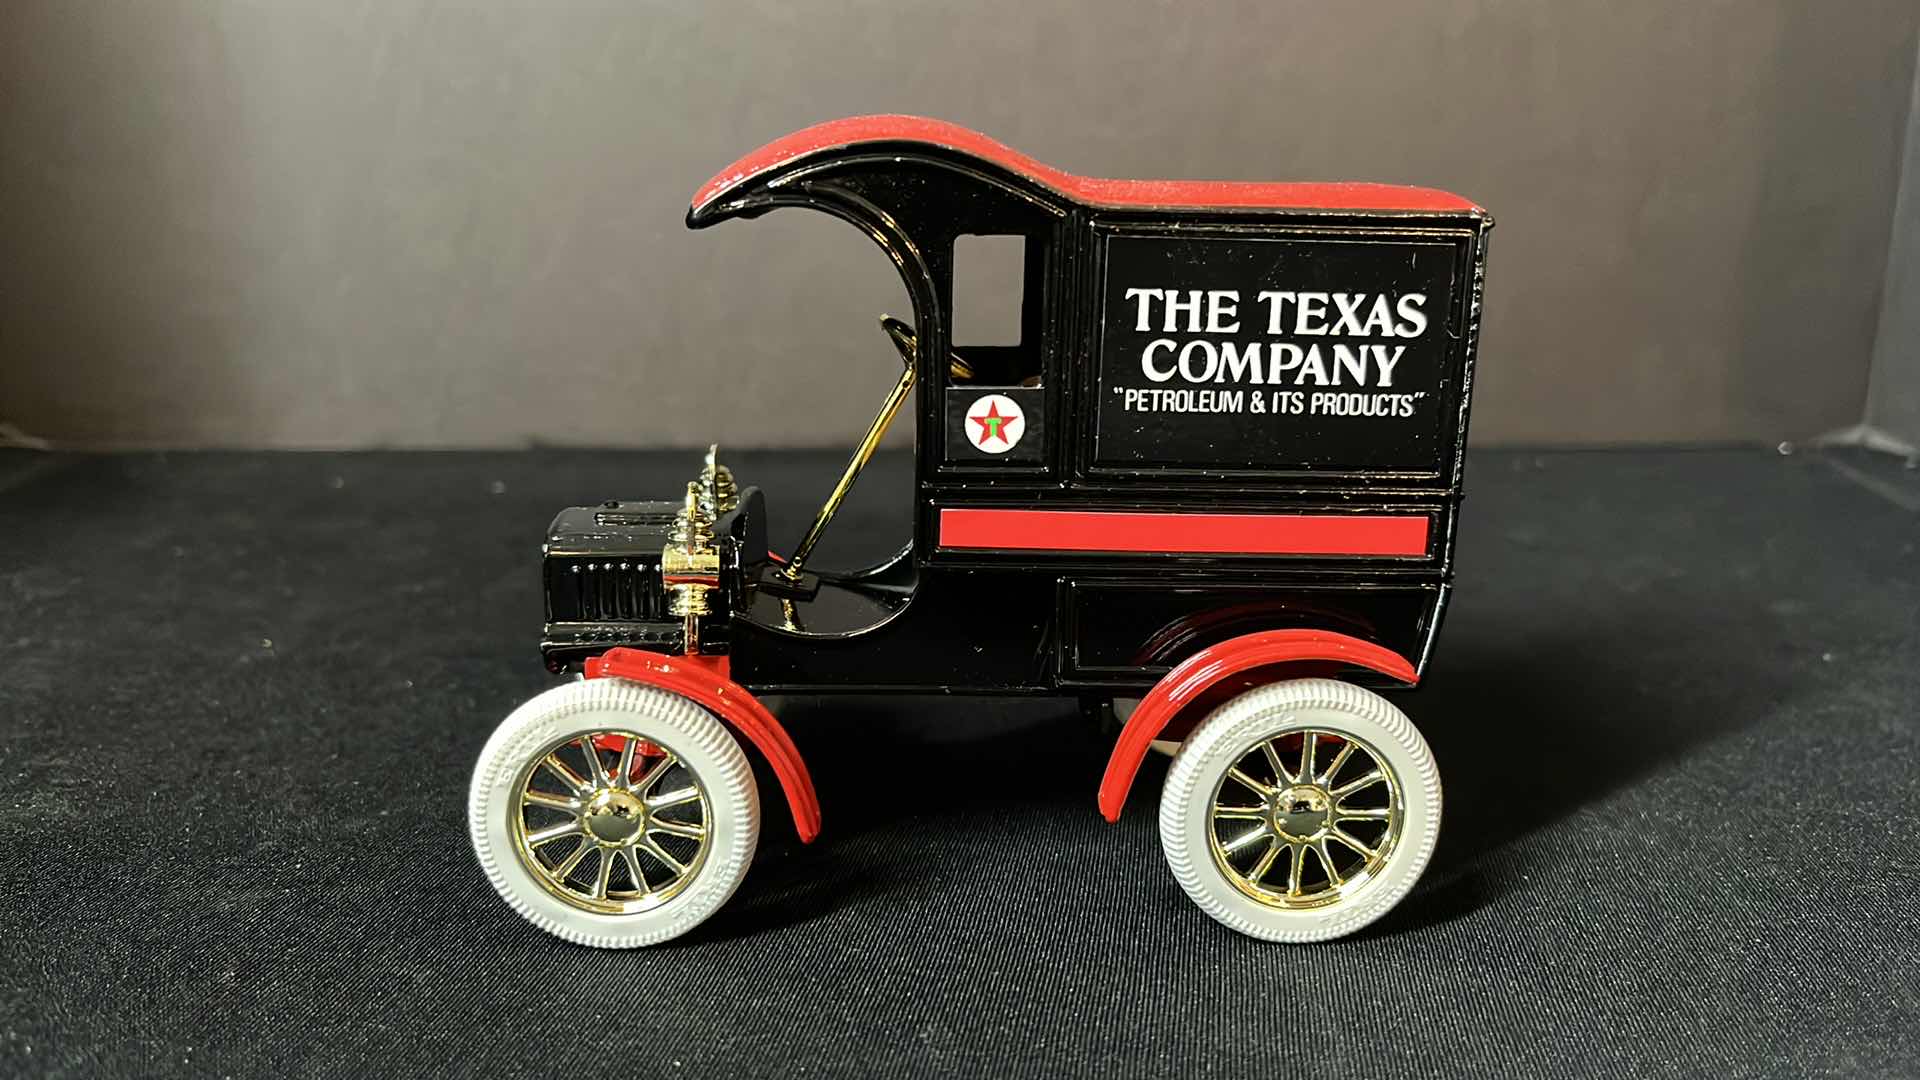 Photo 1 of ERTL DIE-CAST METAL NOSTALGIC COLLECTOR SERIES #4 TEXACO 1905 FORD DELIVERY CAR LOCKING COIN BANK W KEY, 1994 (STOCK NO 9321UO)